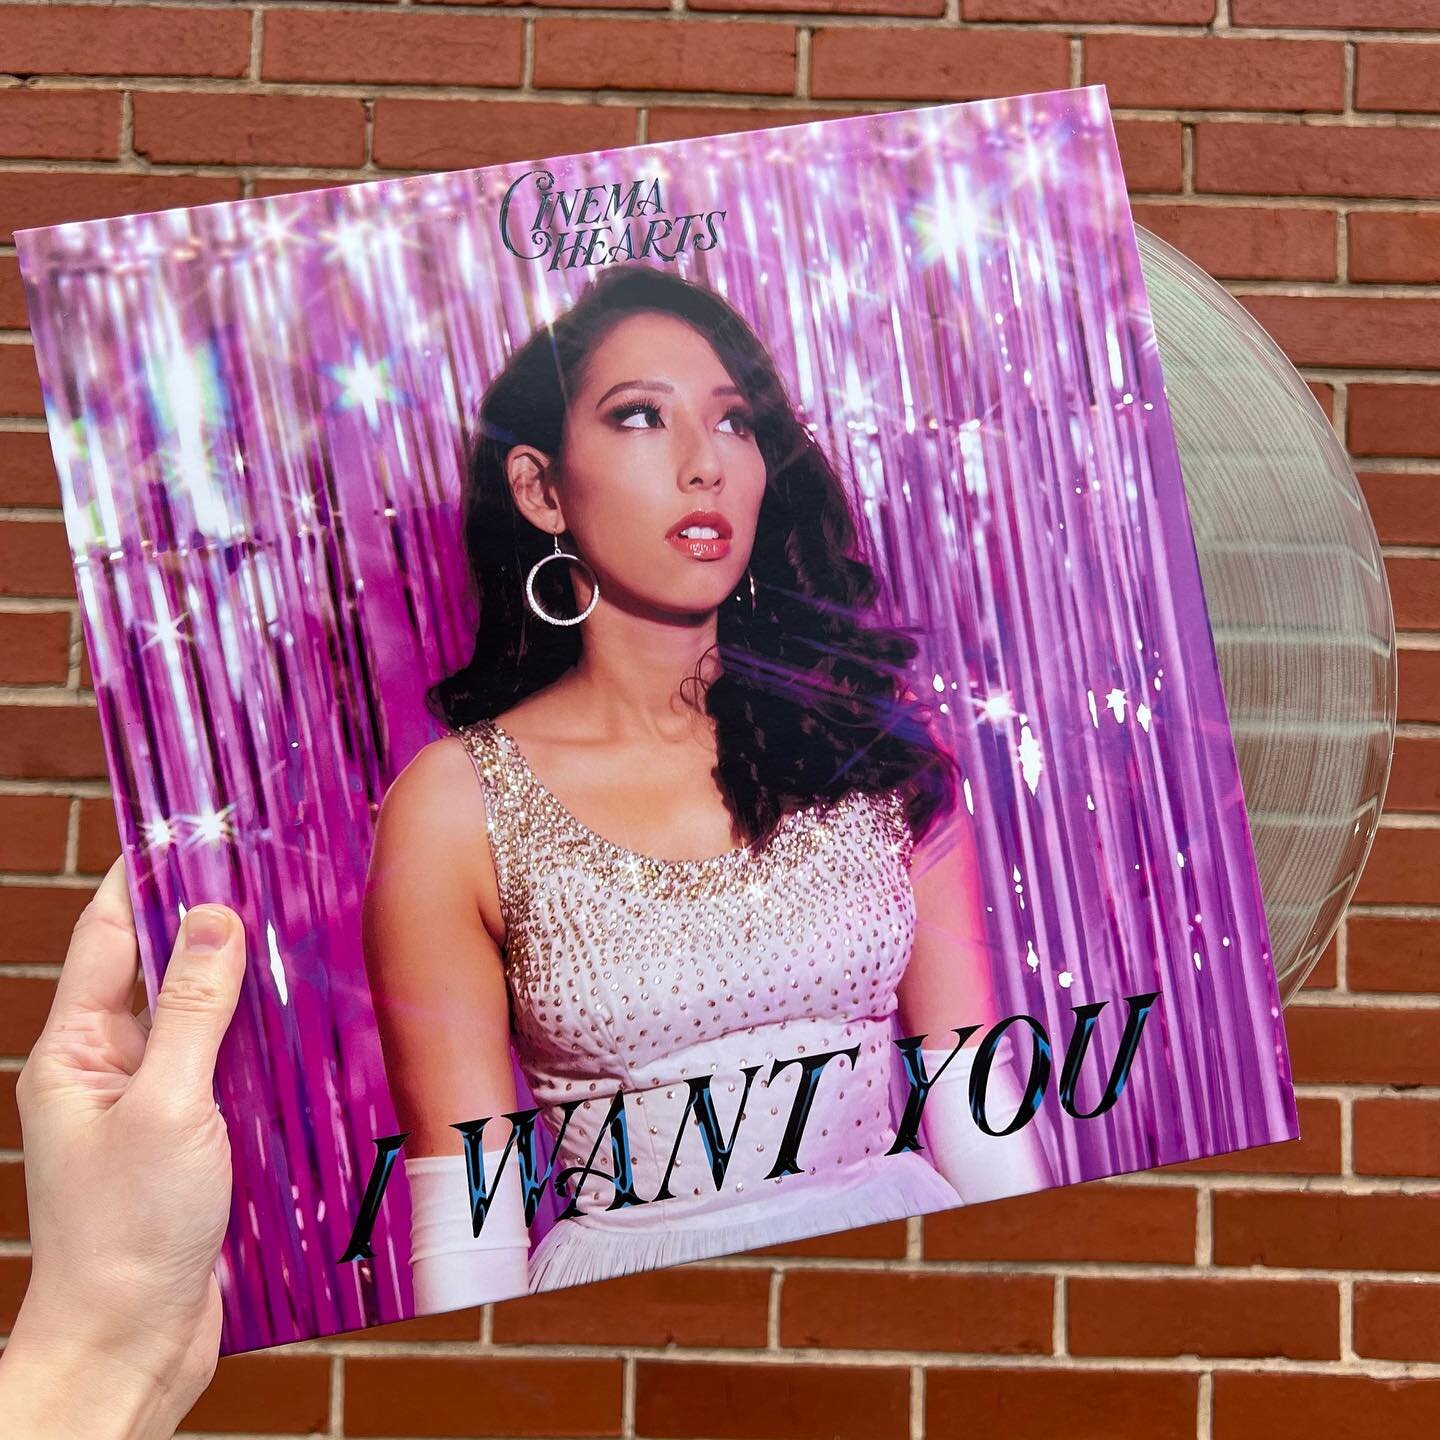 &lsquo;I Want You&rsquo; is out now on coke bottle clear vinyl! pick it up on @bandcamp, at our @theatlantis_dc show tomorrow, or in these local record stores:

💖 @wonderrecords Harrisonburg, VA
💖 @rightonrecords Herndon, VA

album art by @sammyhea